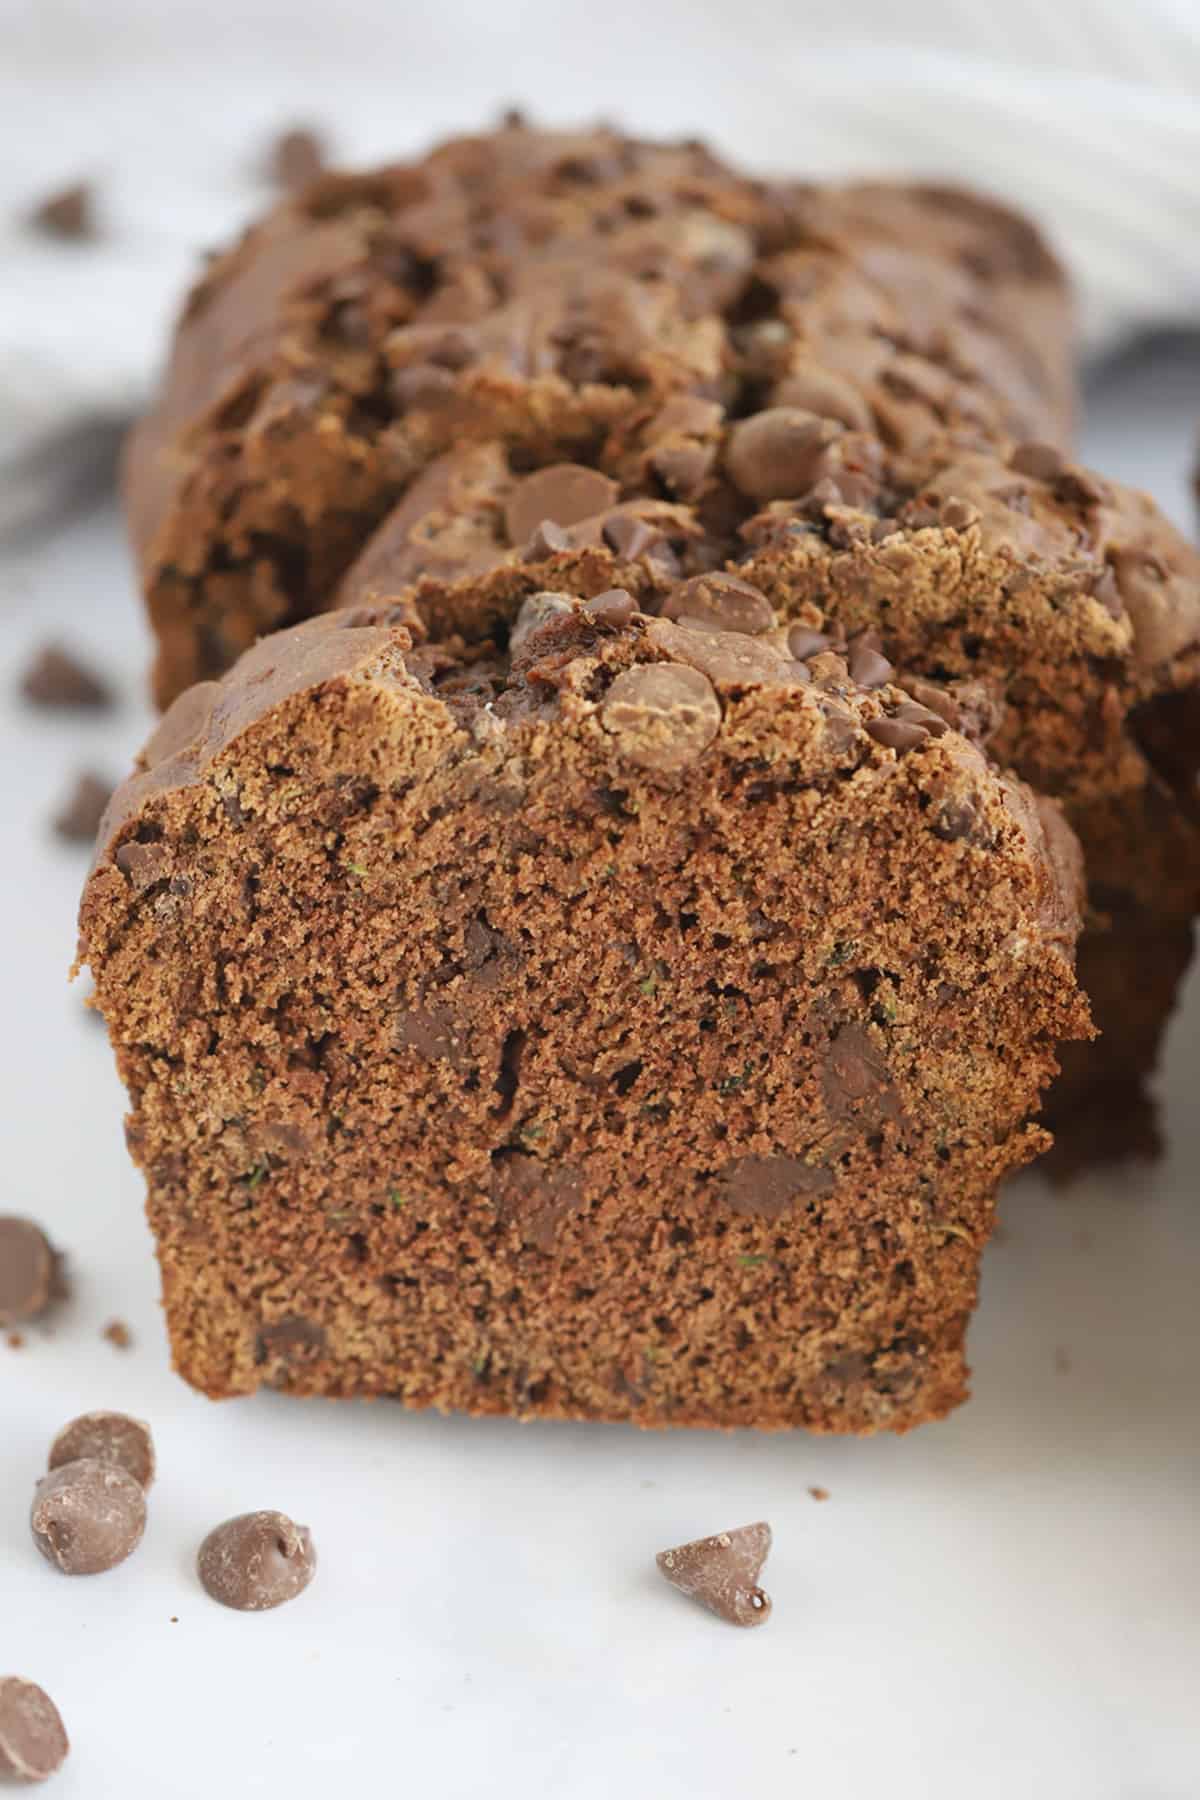 Slices of a loaf of chocolate zucchini bread on a table surrounded by chocolate chips.